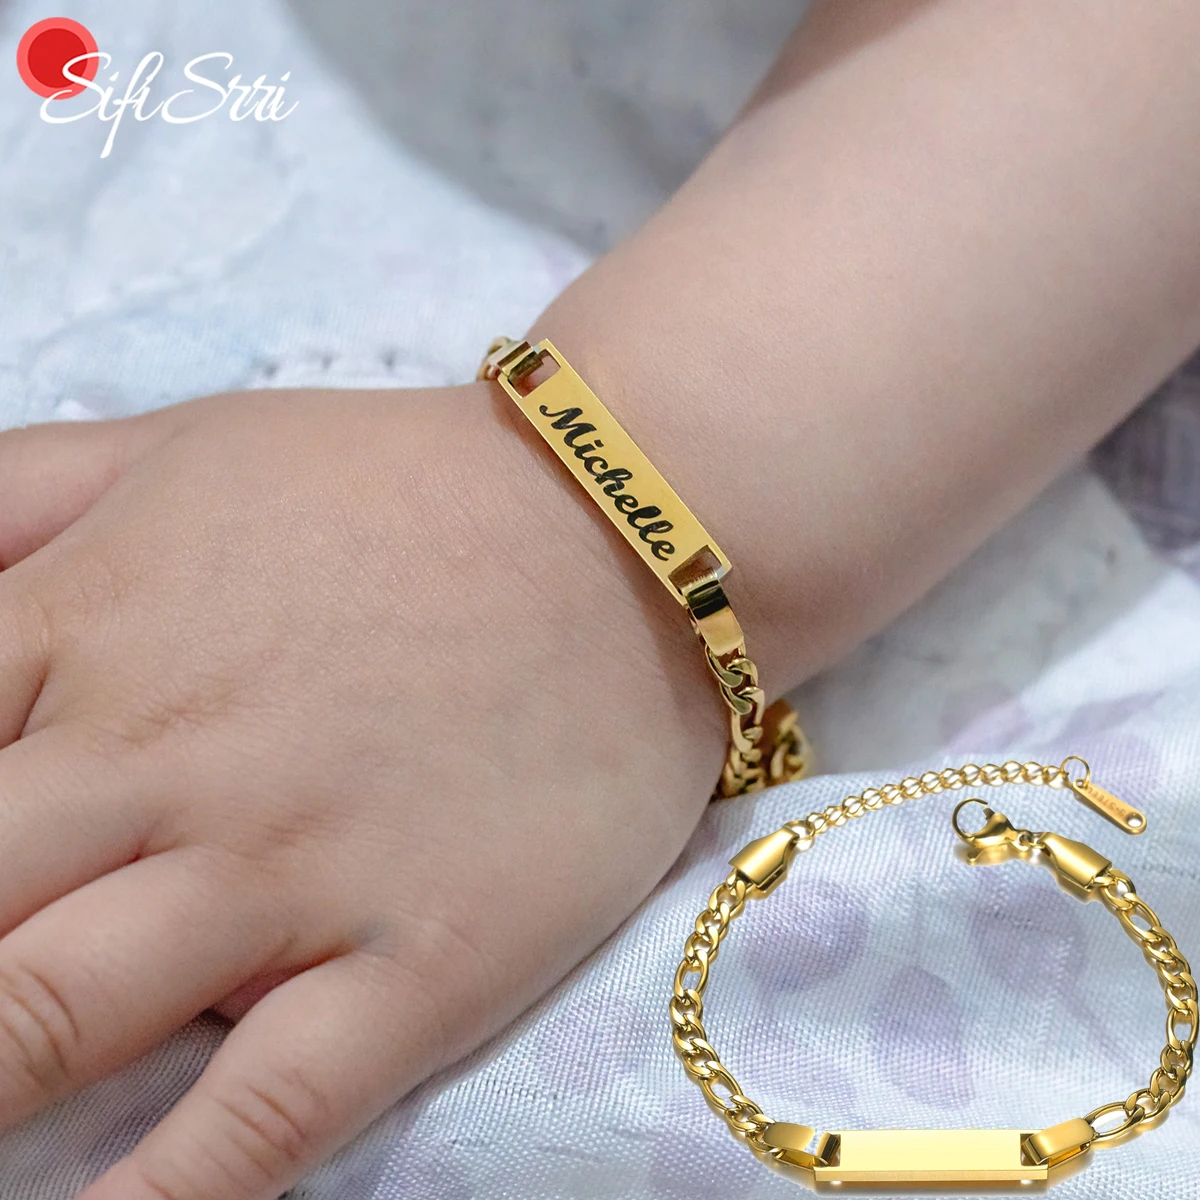 

Sifisrri Personalize Baby Name Bracelet Stainless Steel Figaro Chain Smooth Bangle Adjustable Baby Toddler Child ID Saft Jewelry